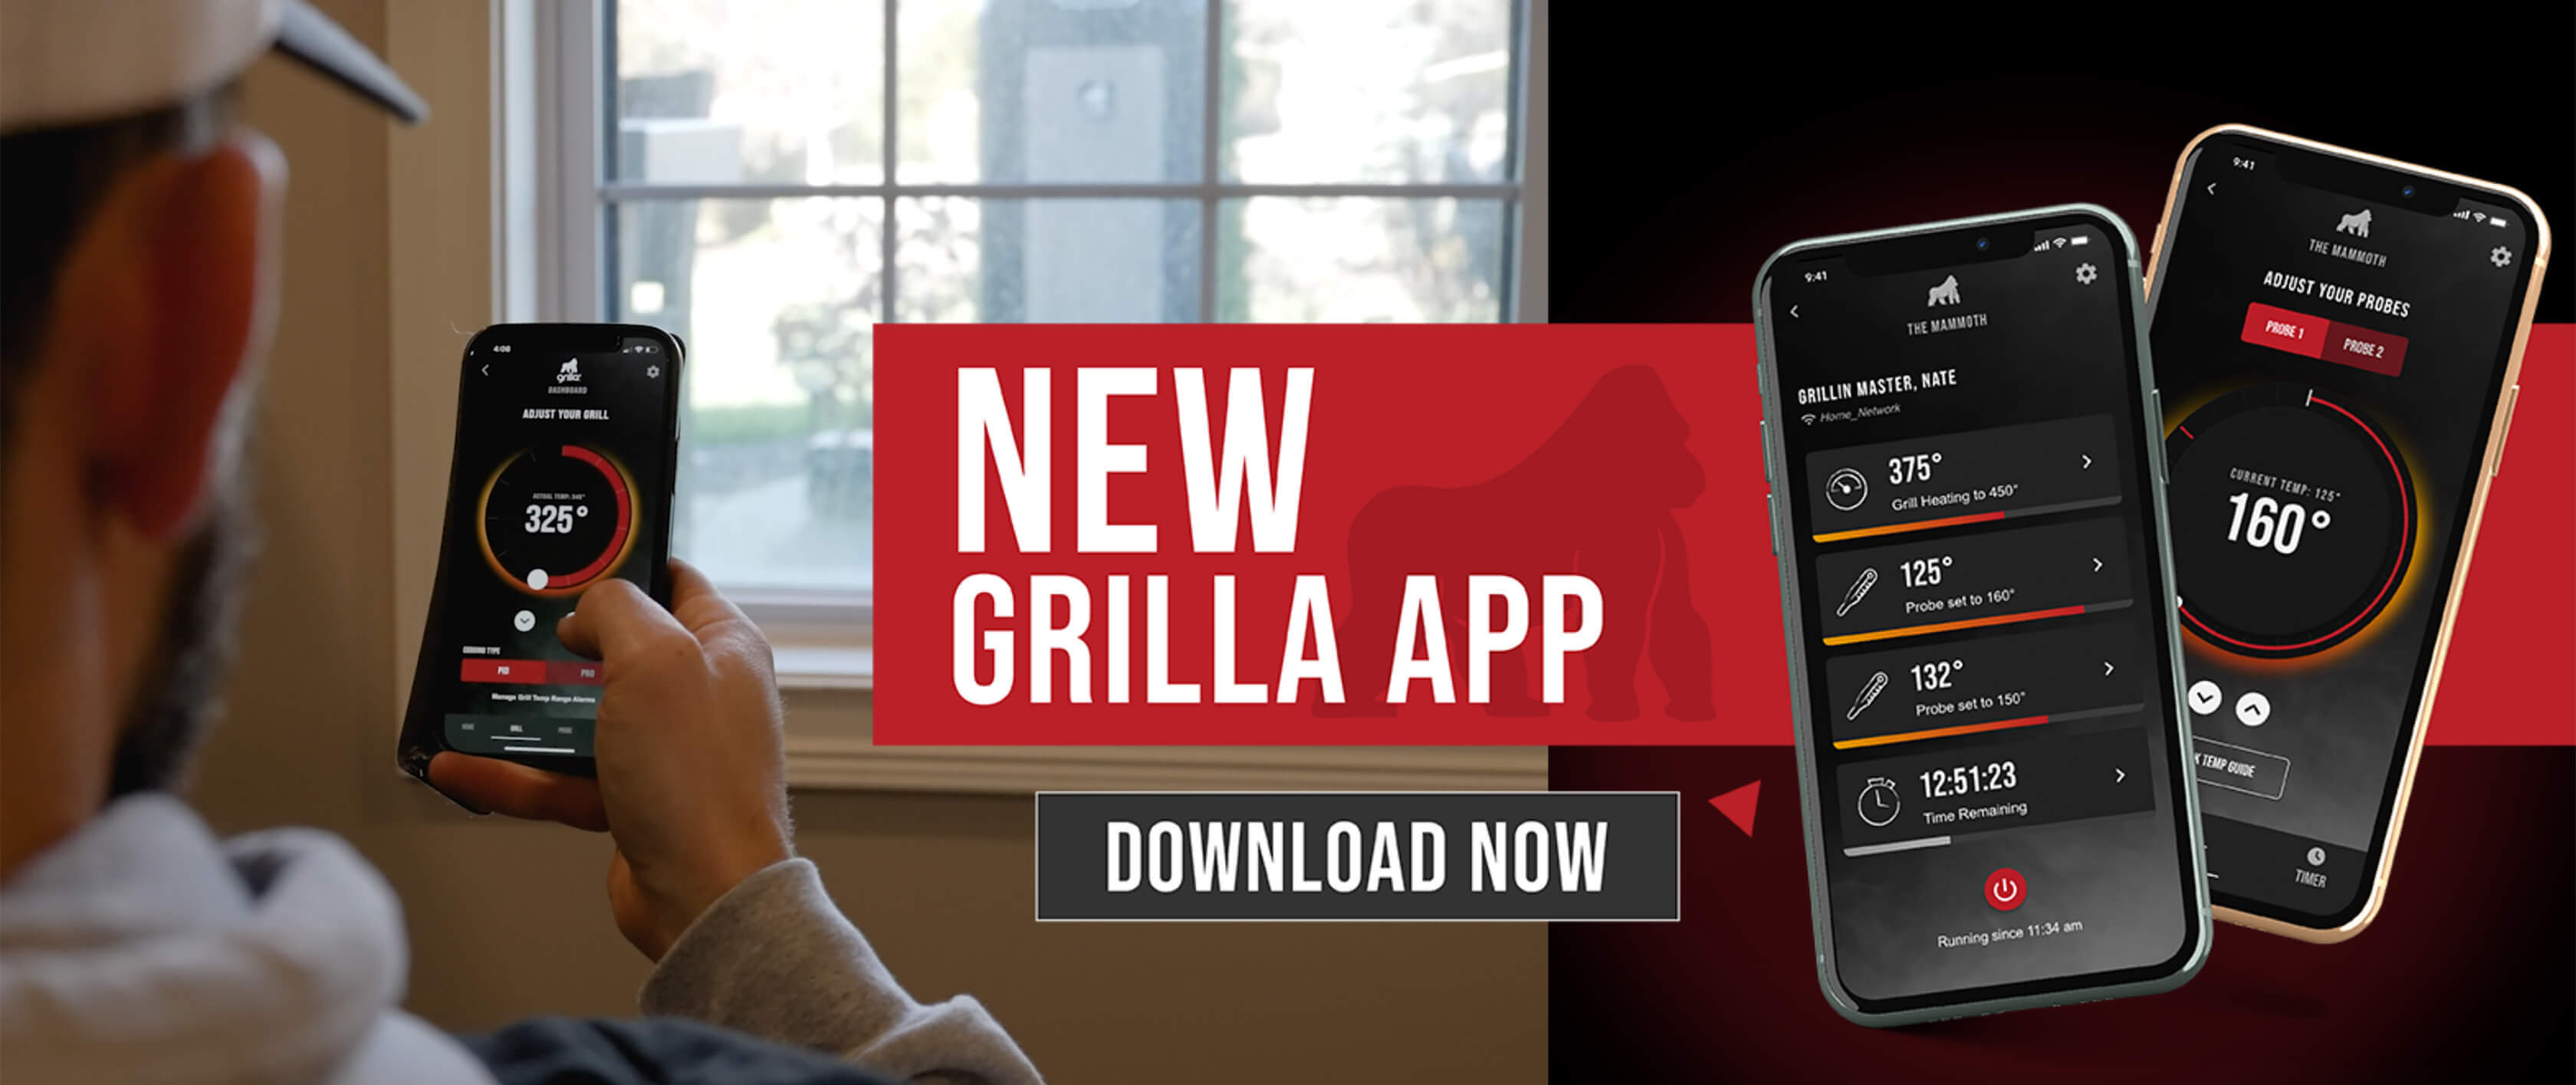 new grilla app- download now photo of man on couch looking at his new grilla app with the mammoth vertical smoker on and smoking out the window. He's cooking from his couch with his new grilla mammoth vertical pellet smoker